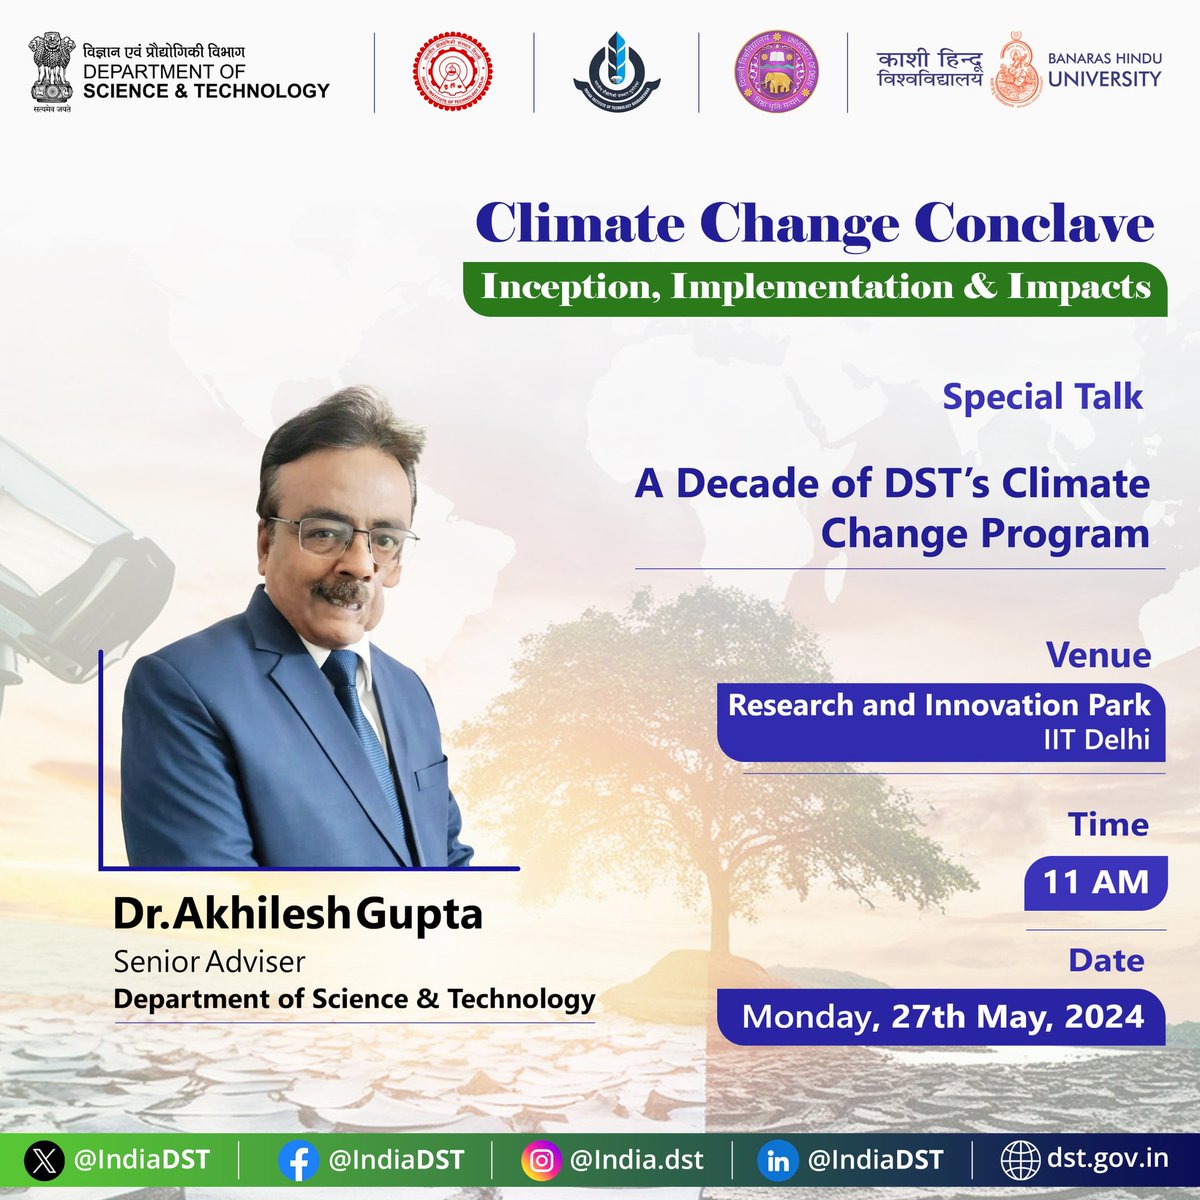 Excited about my talk on 'A Decade of DST's Climate Change Program' @iitdelhi 27 May 11 am. Launched in 2010, built from scratch, CCP supported 17 CoEs, 35 MRDPs, 9 Network prgms, 4 Task Forces in 300 institutions, 1700 scientists, 600 students.

@karandi65 @IndiaDST @anitadst16